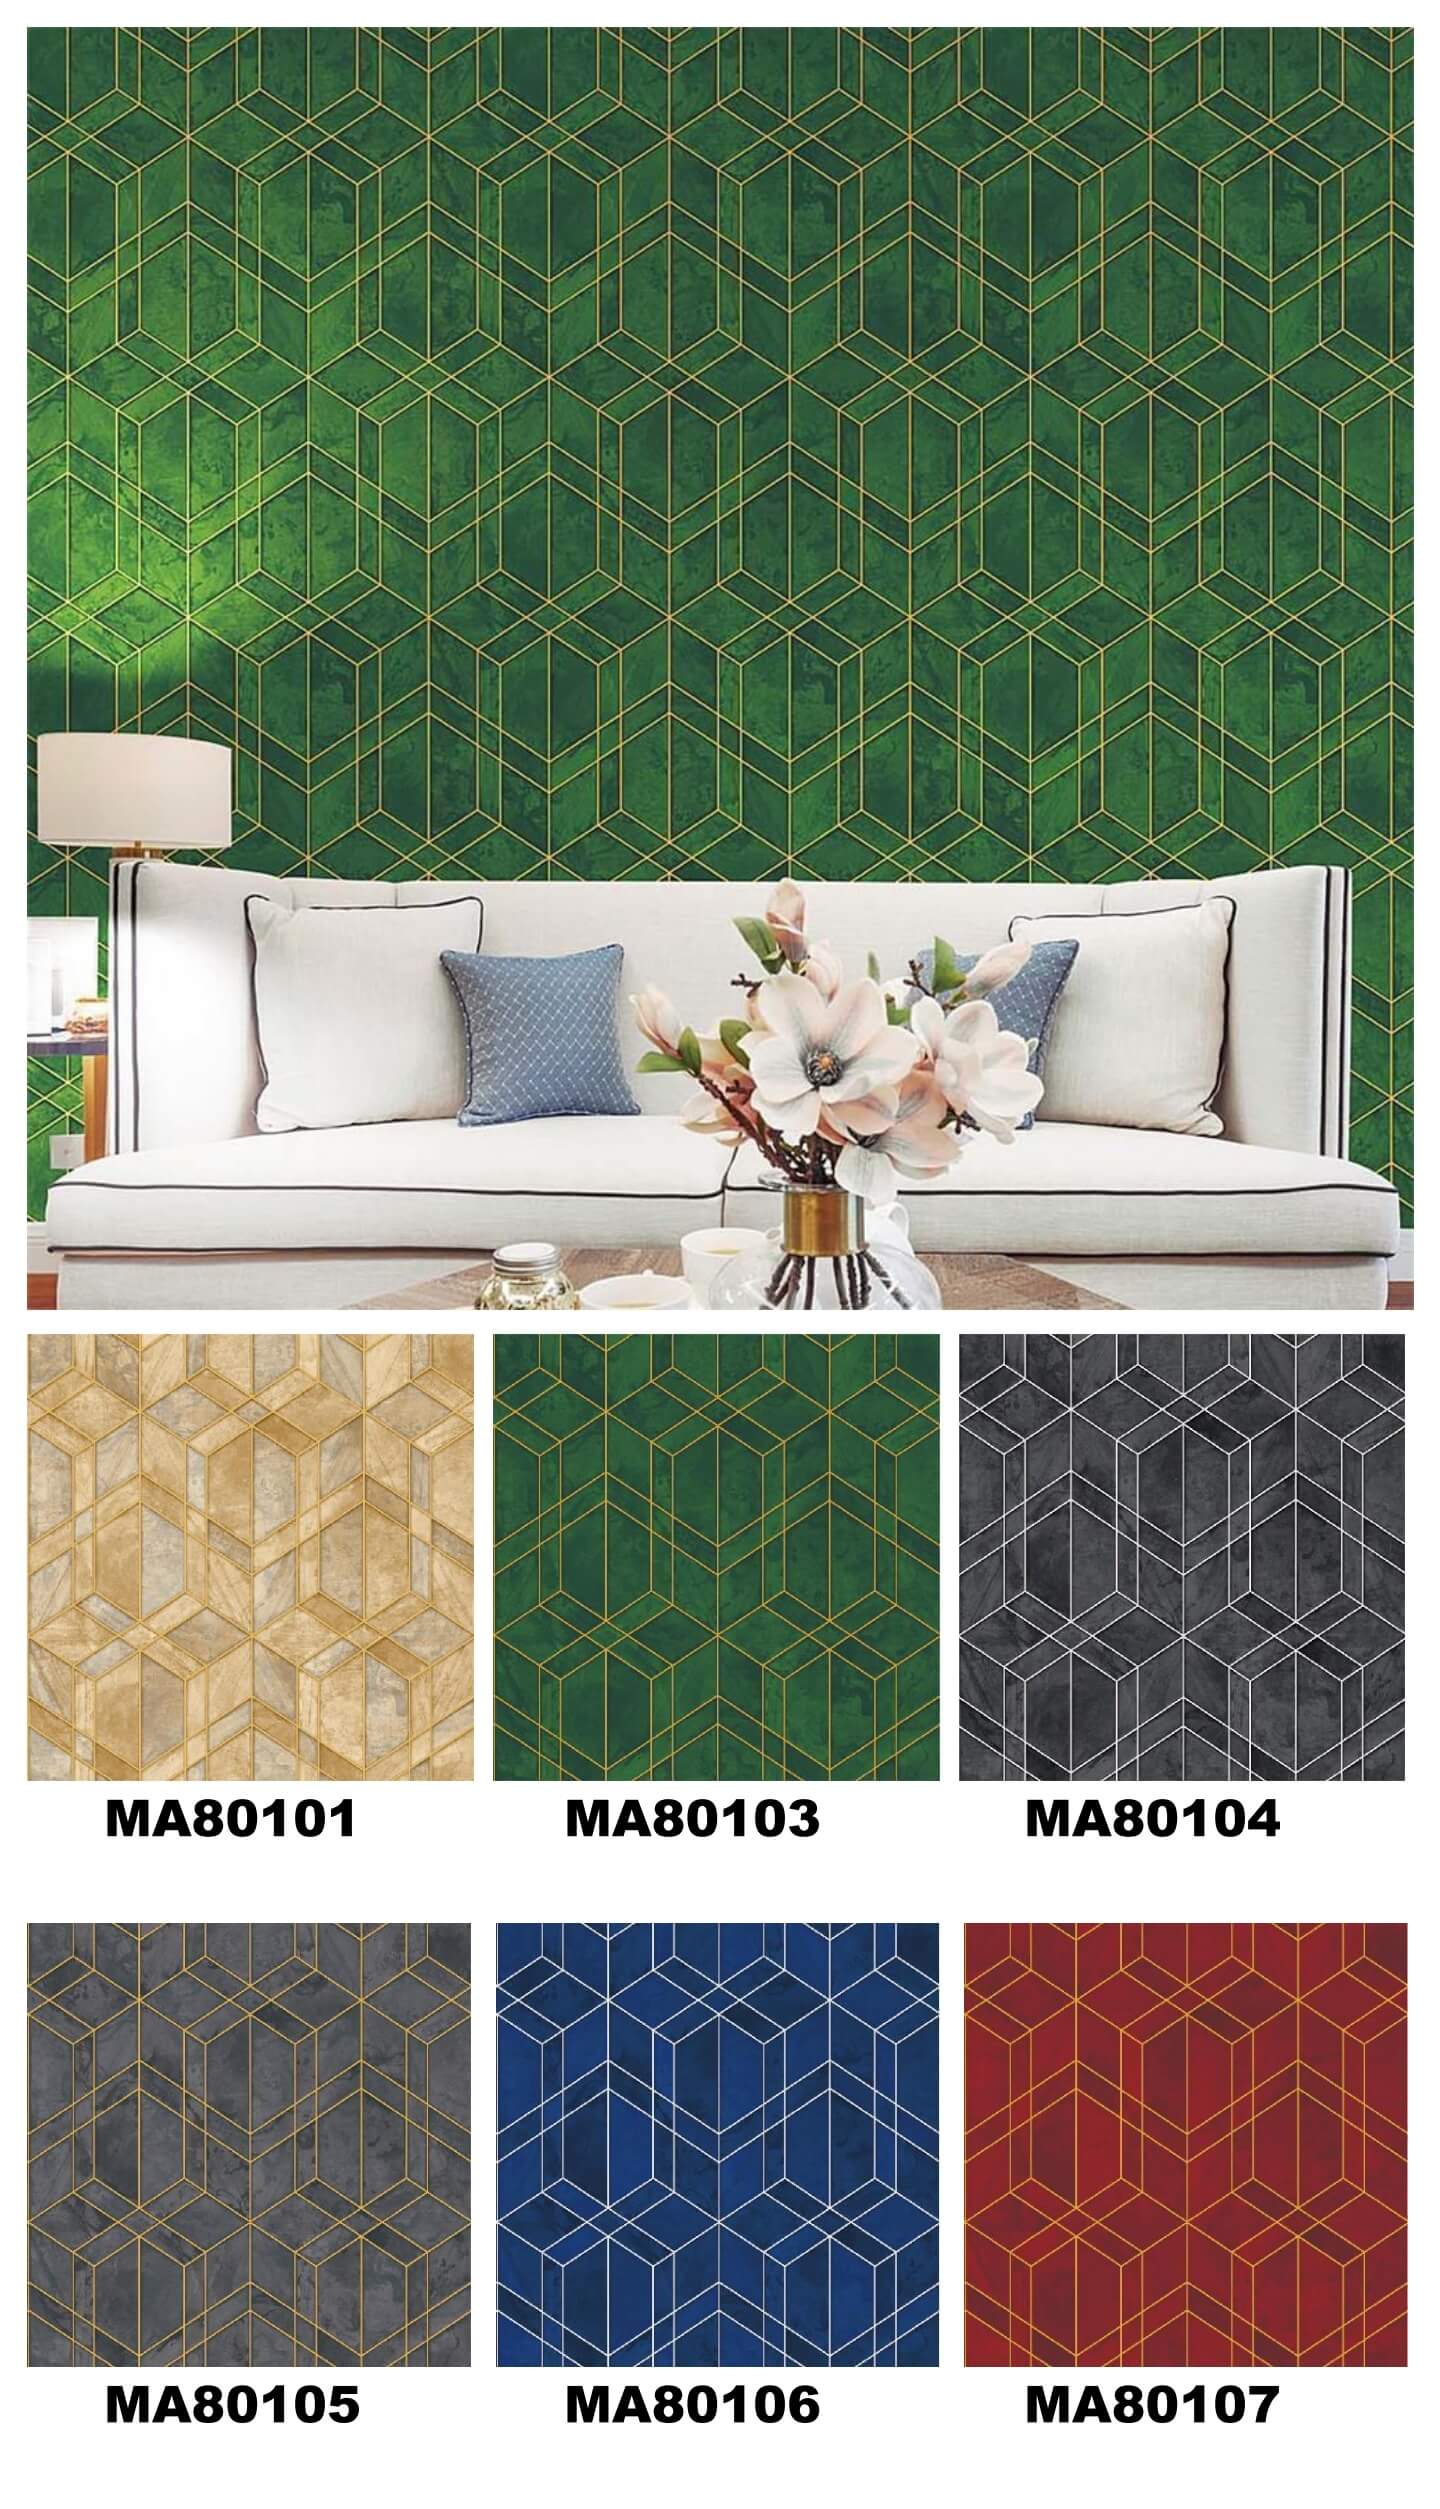 Beautiful Color 3D Design Wallpaper Better choice For Living Area, Bedroom, kids room, Office Durable PVC Wallpapers (2)